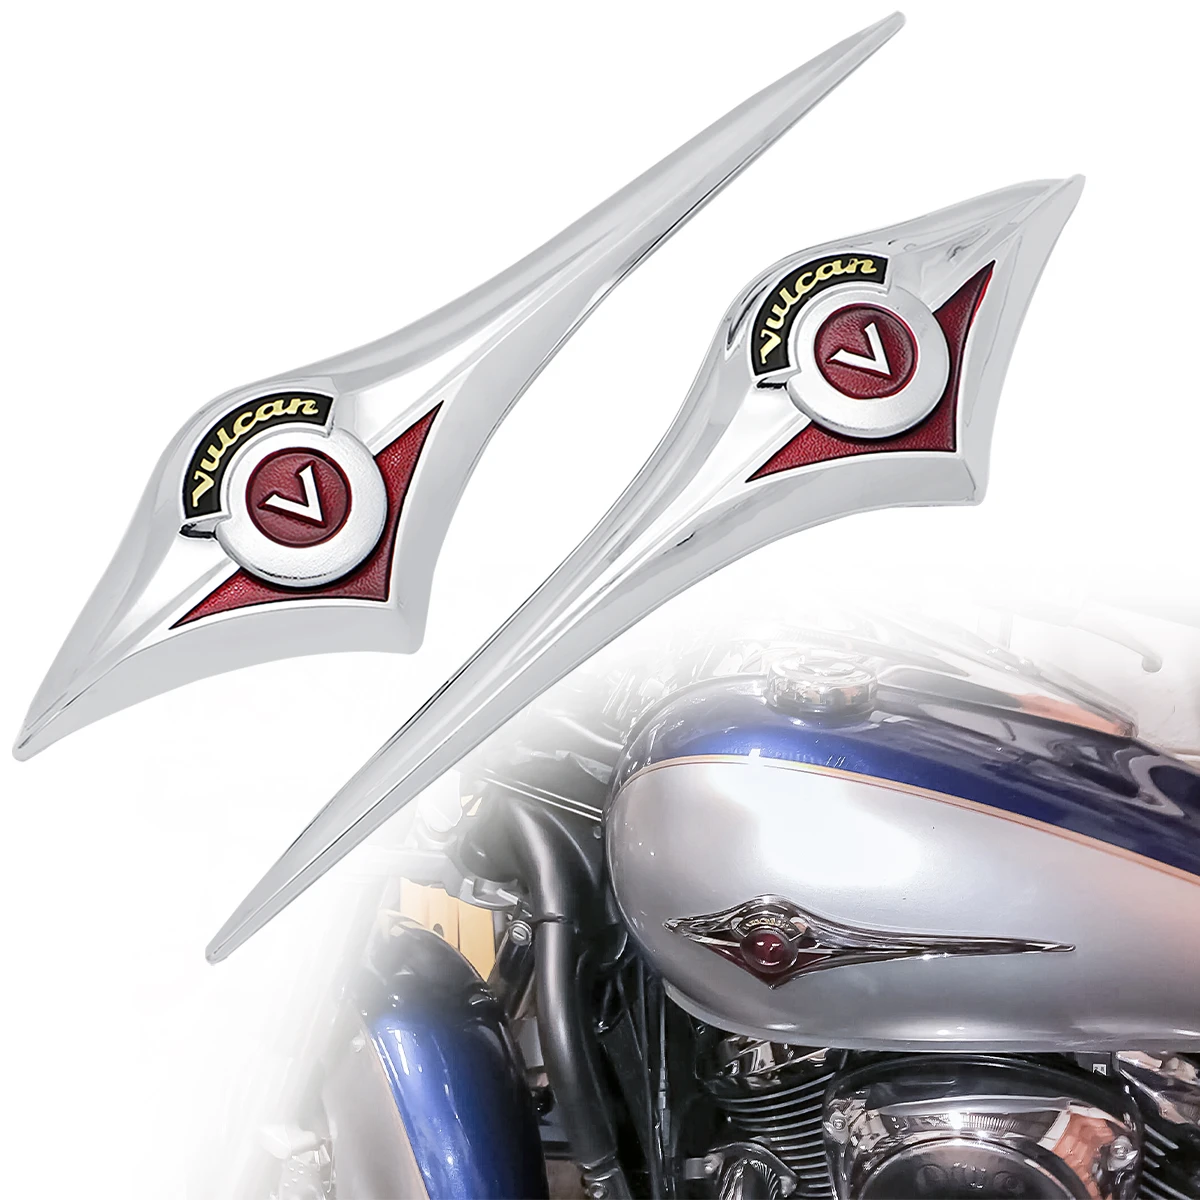 Motorcycle Chrome Fuel Gas Tank Emblem Badge 3D Decals Stickers For Kawasaki Vulcan VN 800 900 400 500 1500 1600 1700 Classic